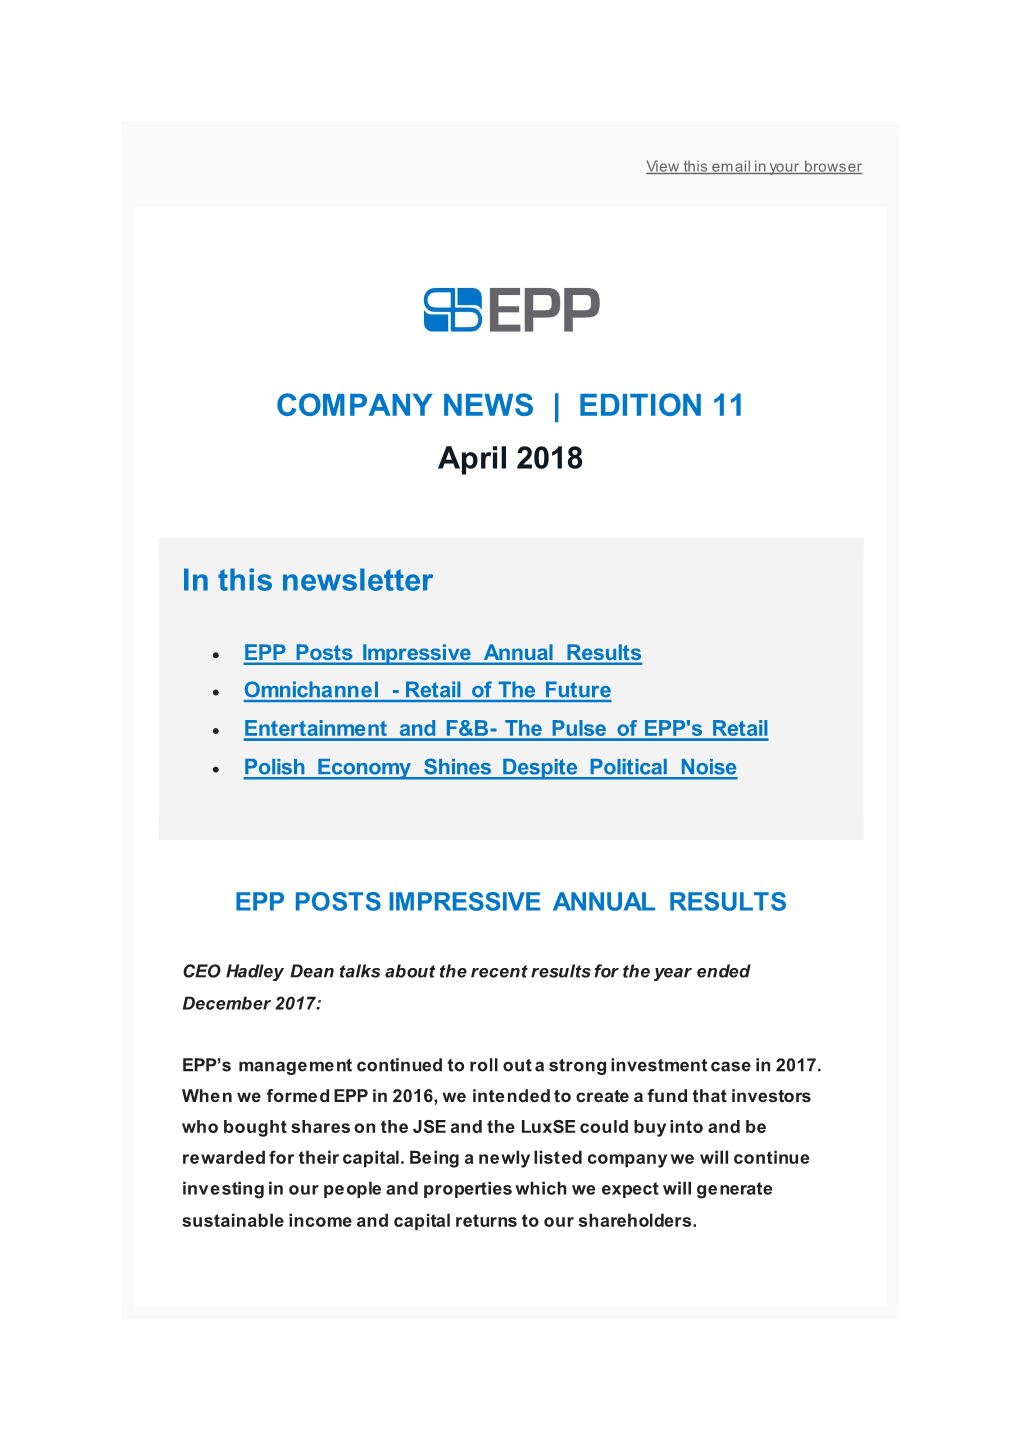 COMPANY NEWS | EDITION 11 April 2018 in This Newsletter